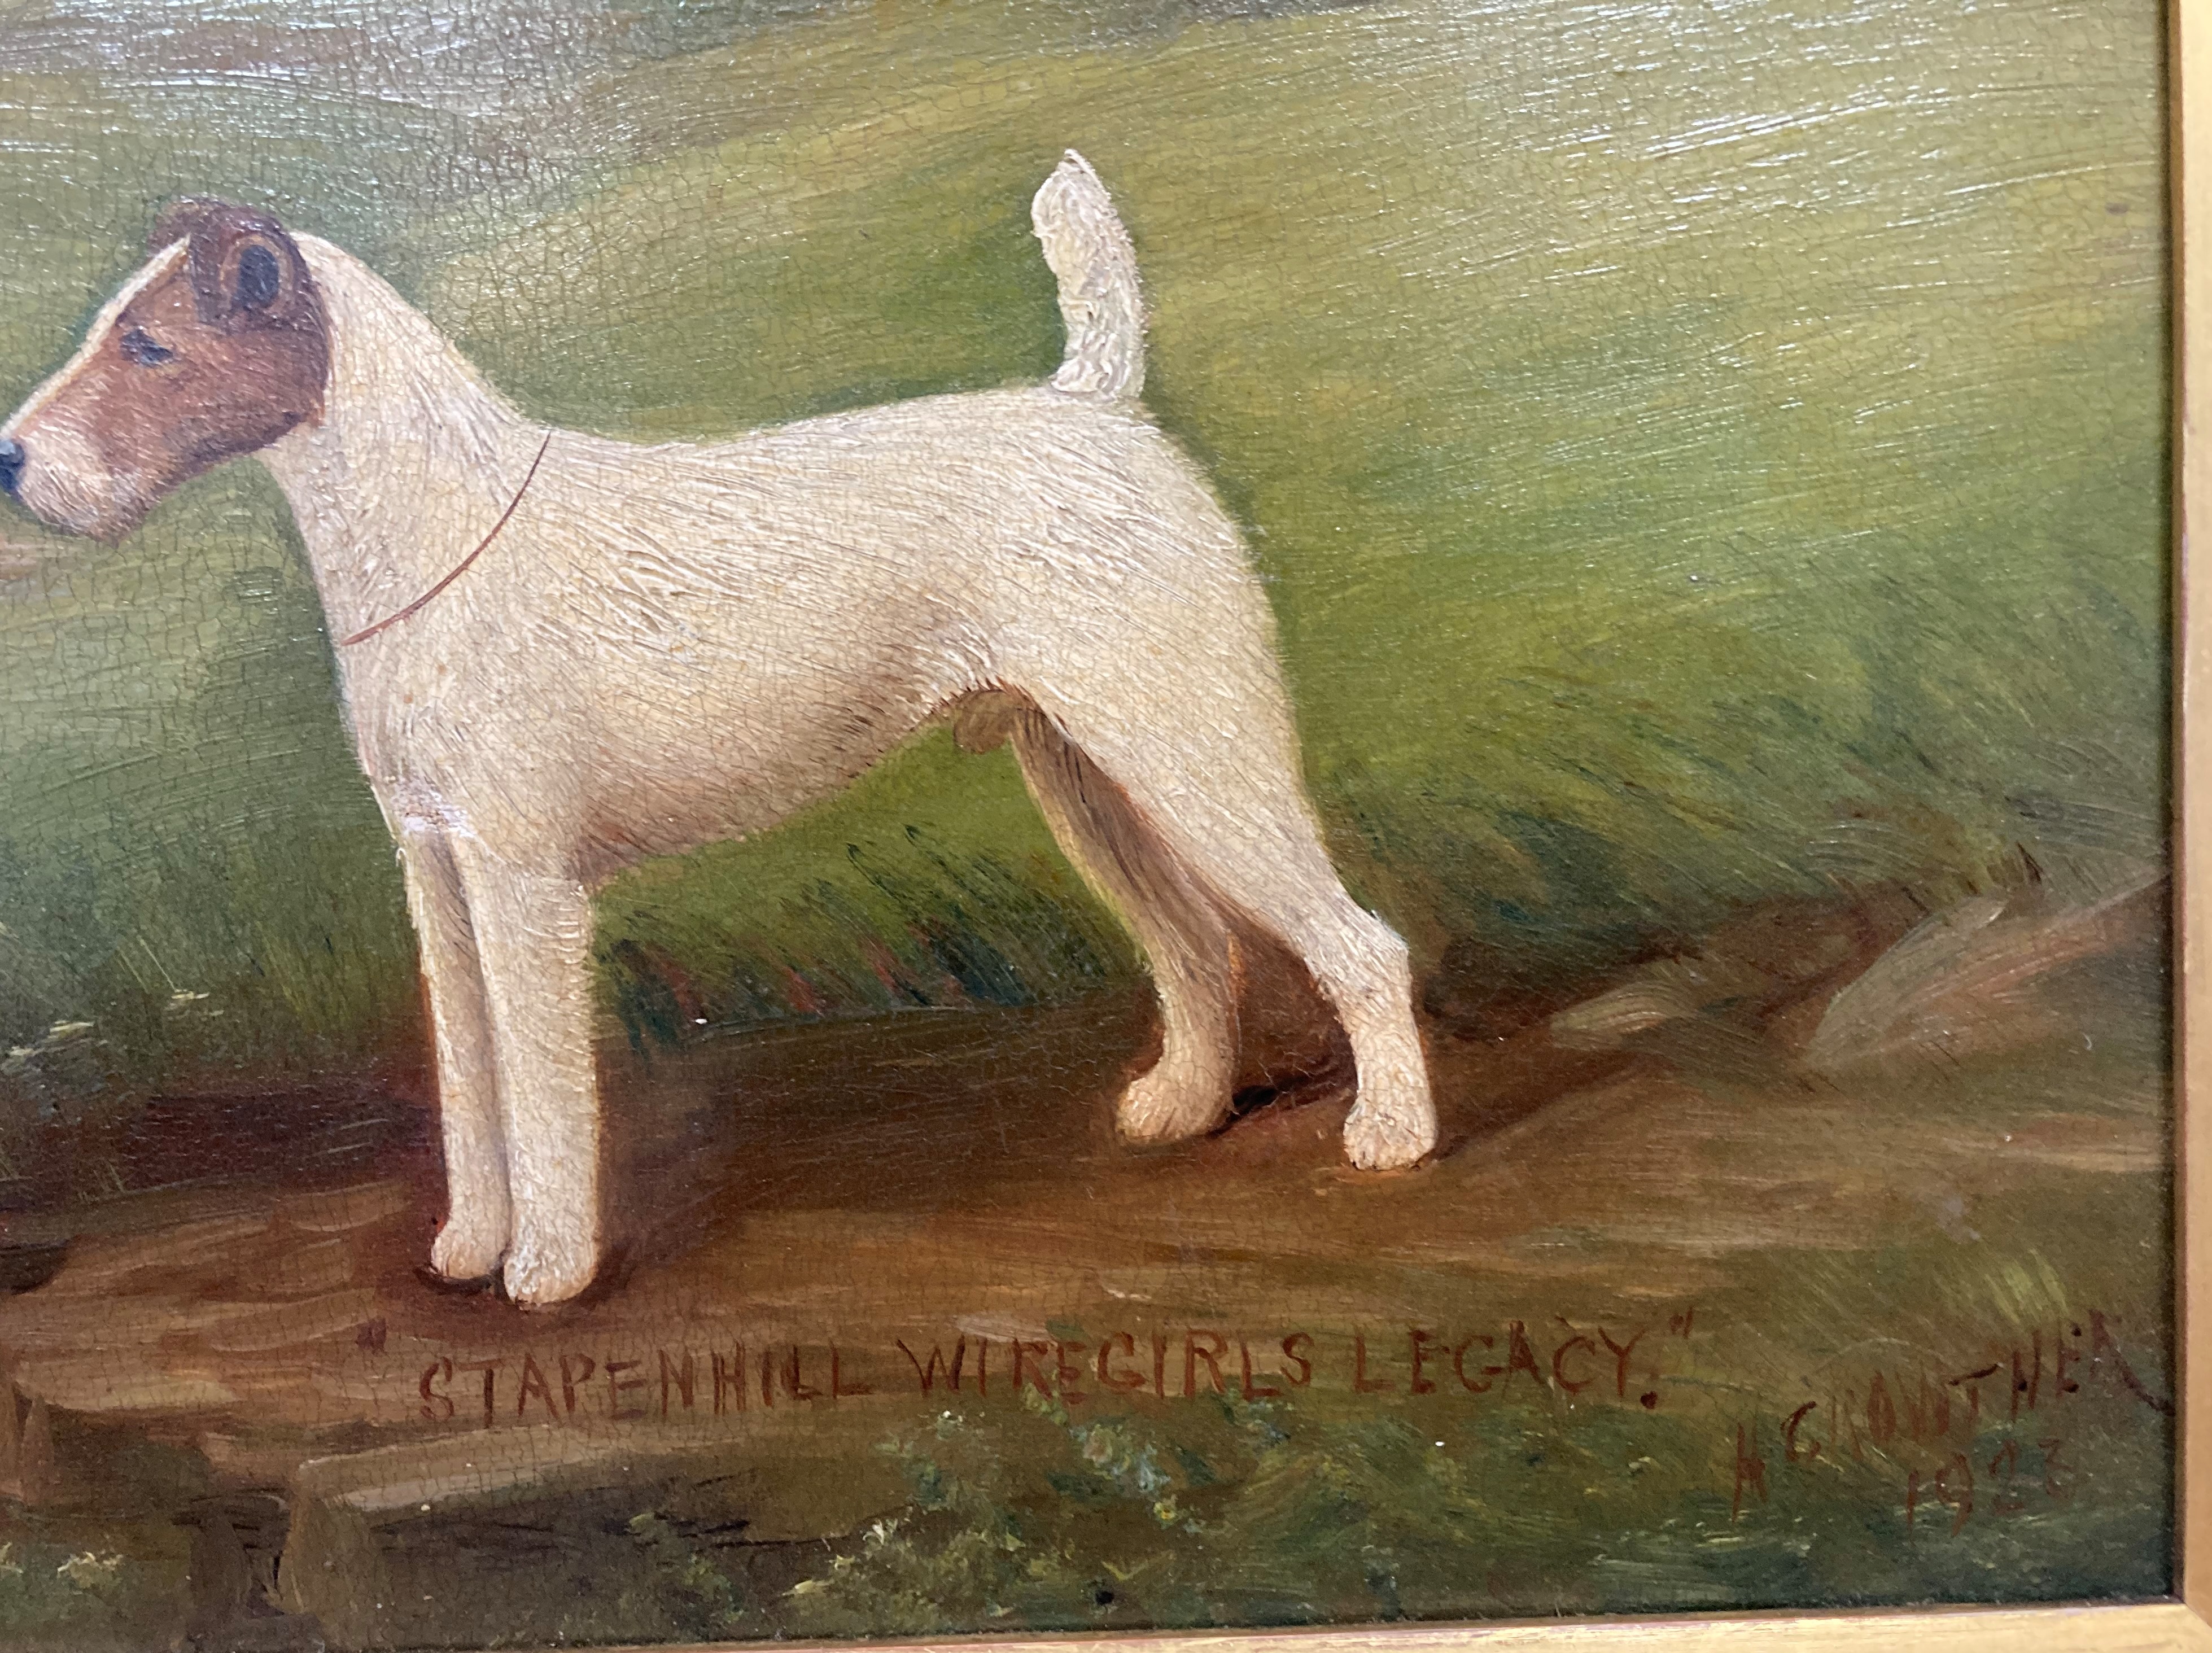 H Crowther 1923, 'Stapenhill Wiregirls Legacy', study of a fox terrier, oil on canvas, - Image 16 of 32